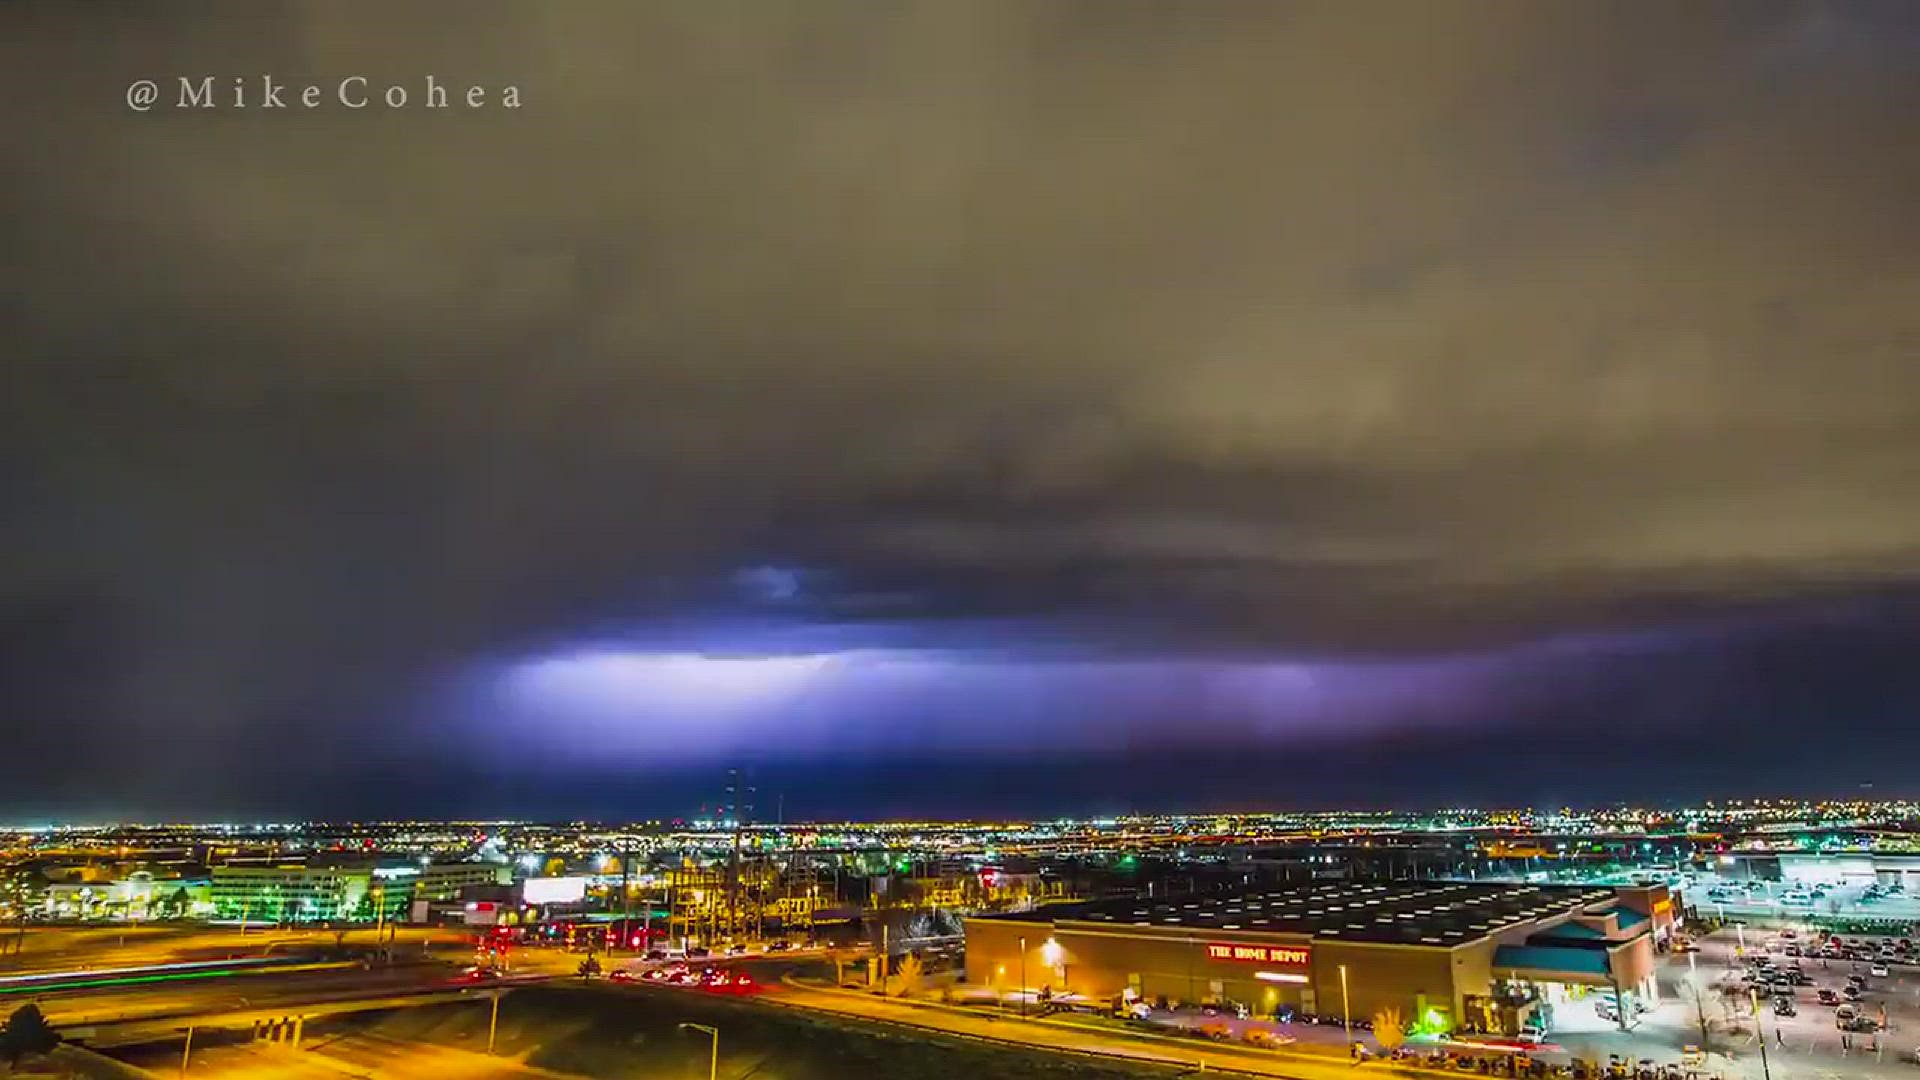 Nature put on quite the light show Wednesday evening during a thunderstorm over the Mile High City.